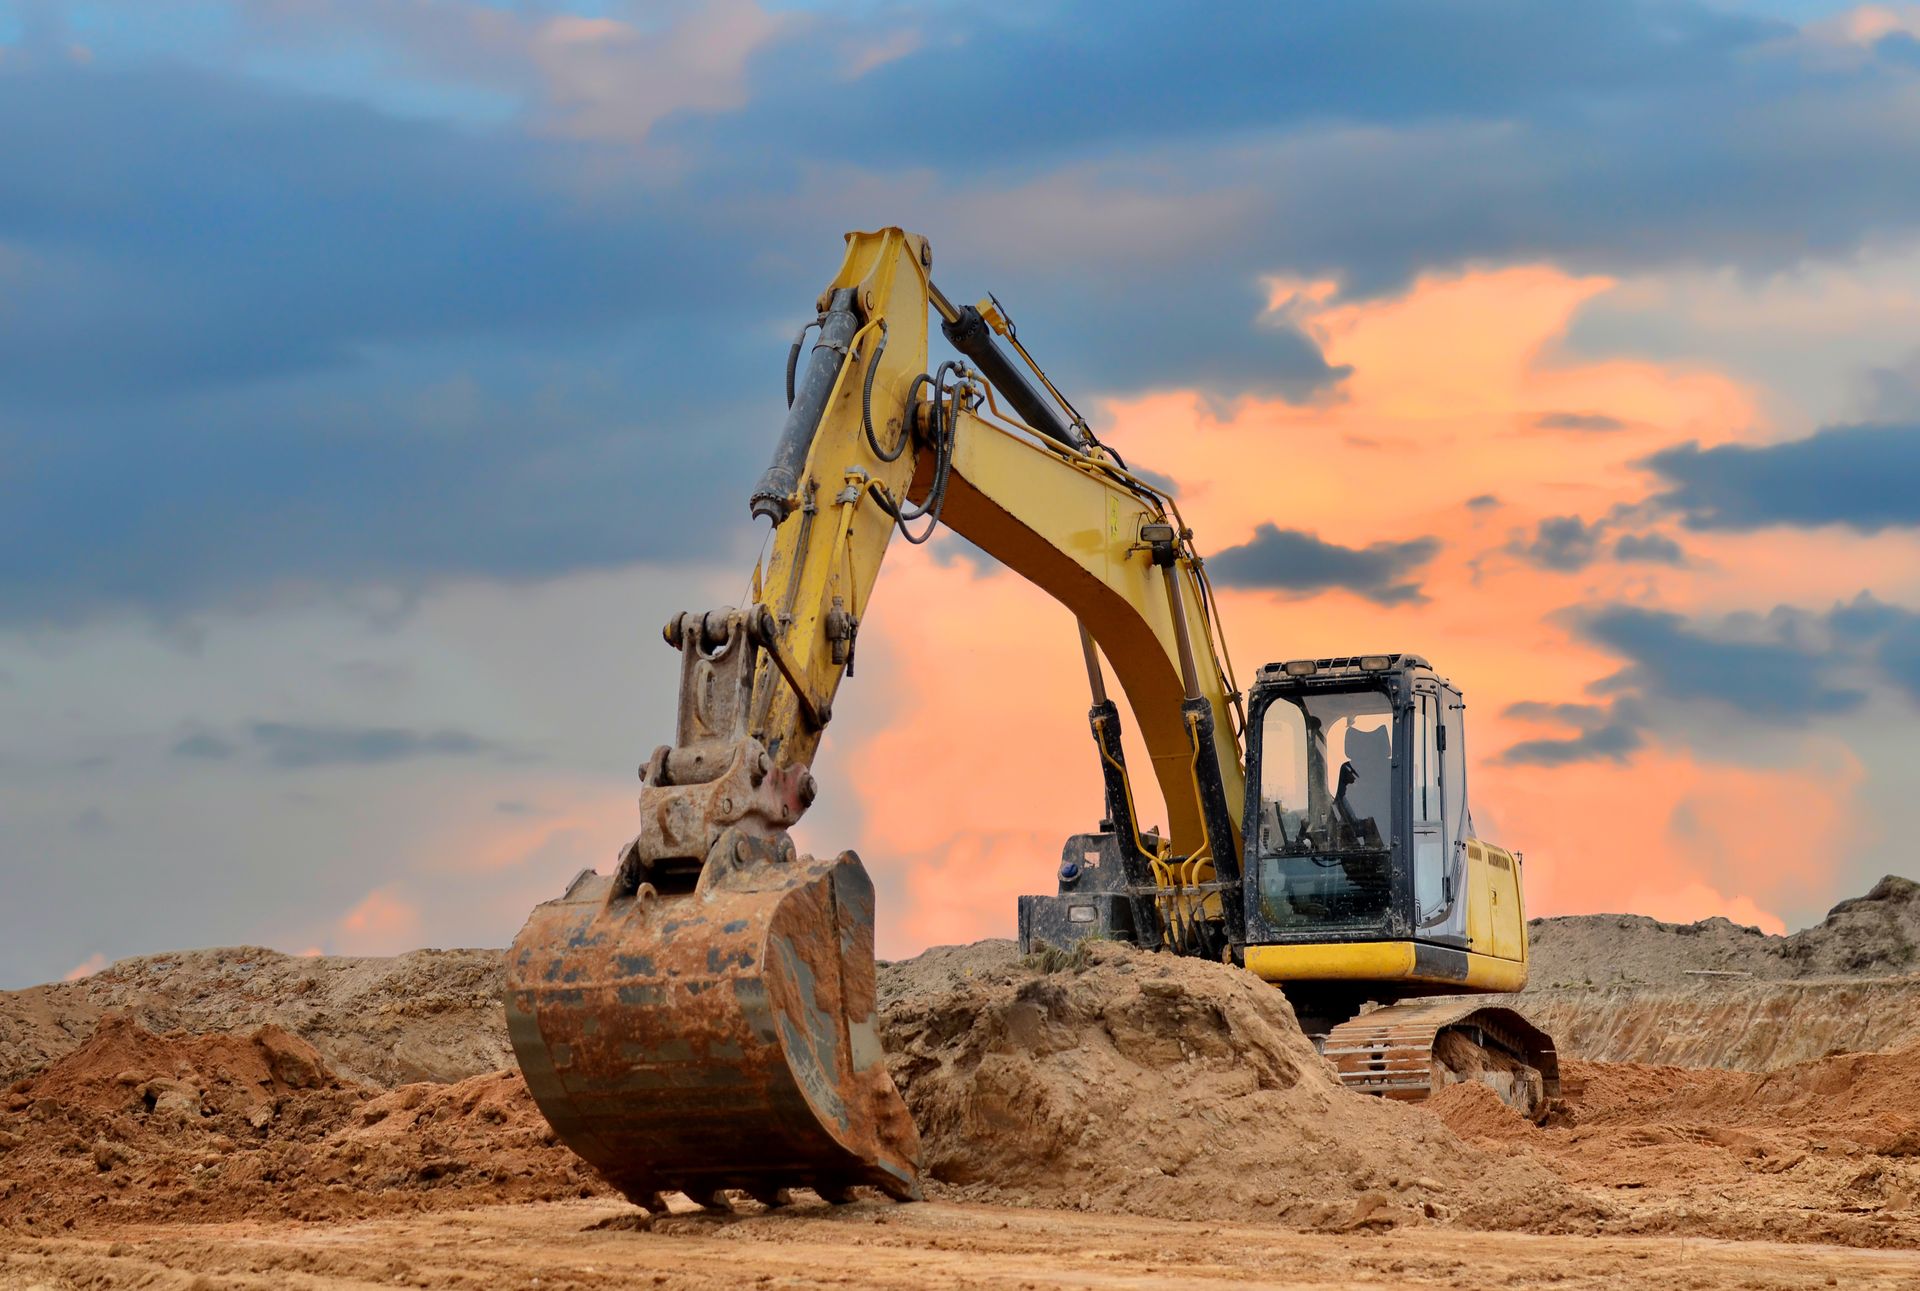 An excavator at work in an open pit mining operation during sunset.